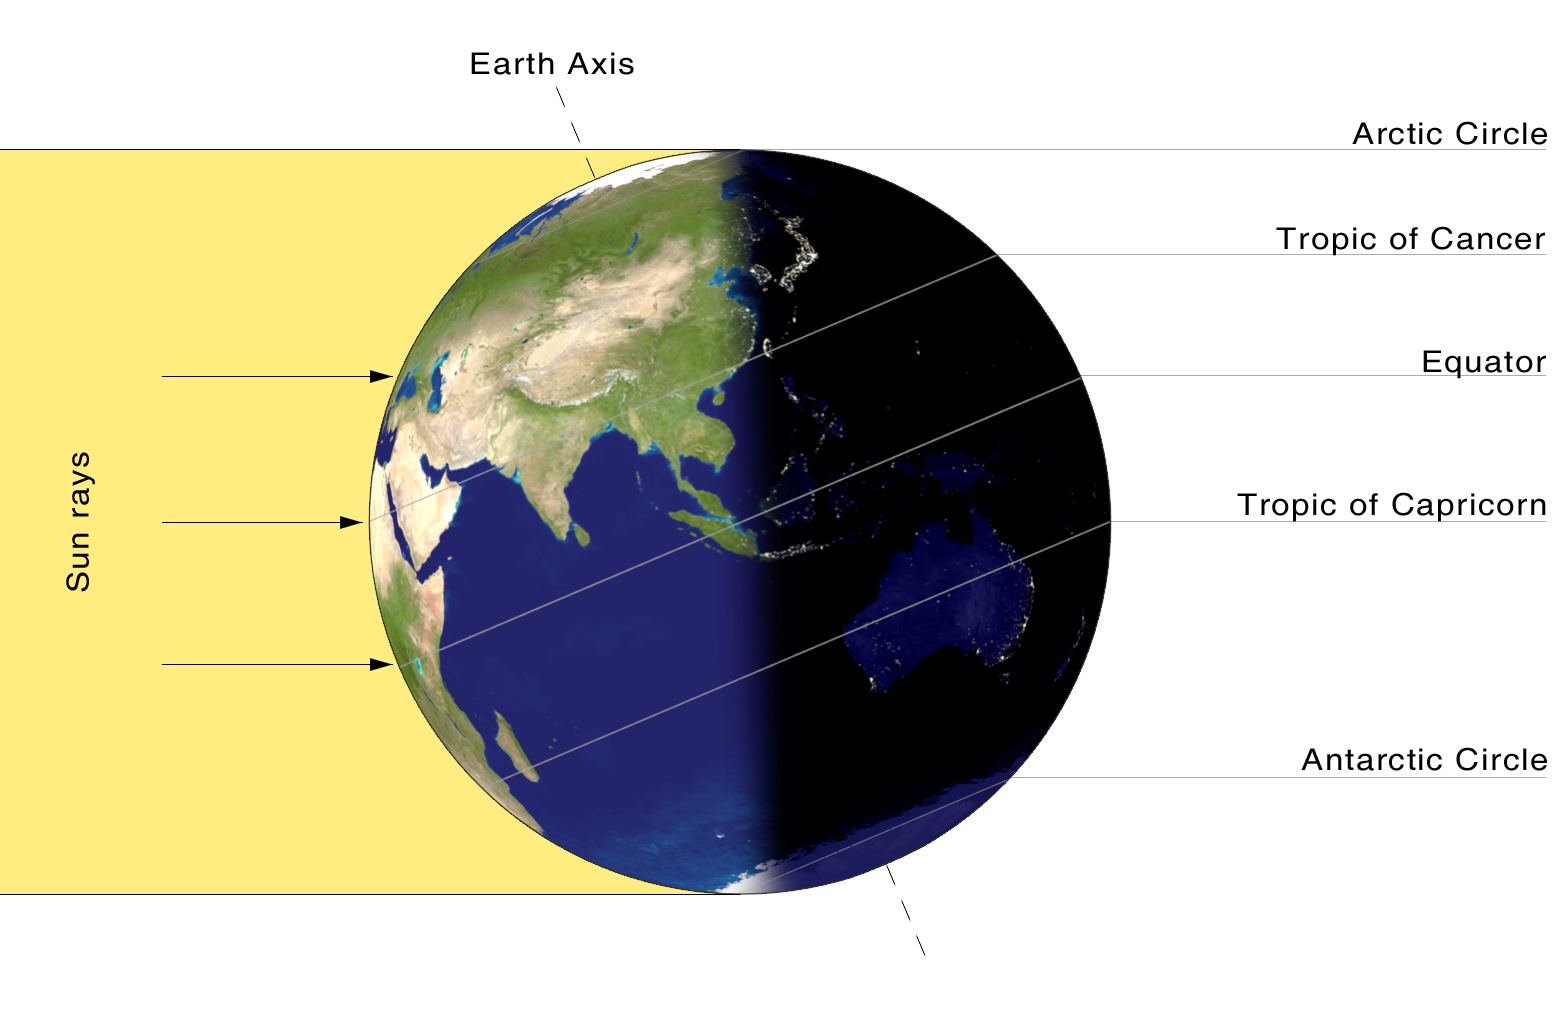 A graphic showing both the light and dark side of the earth with labels for the equator, tropics, and circles.